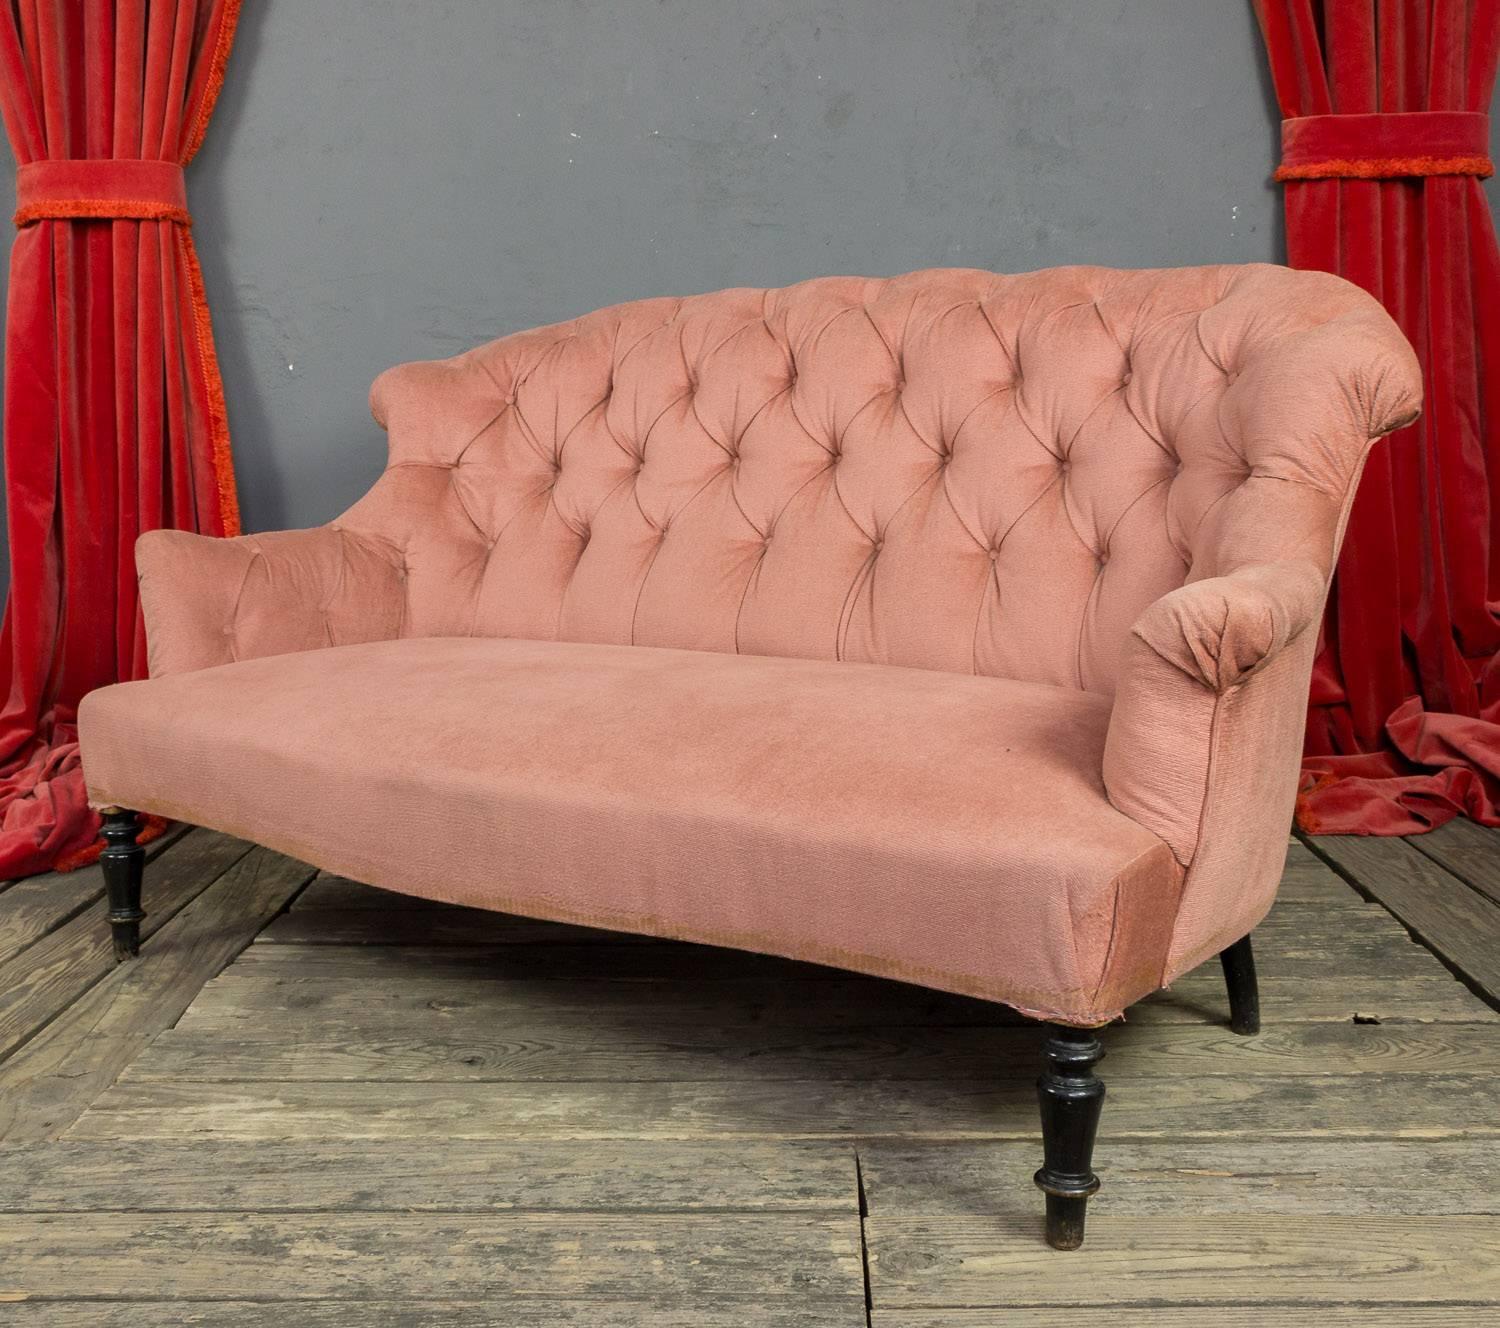 French 19th century Napoleon III tufted pink settee with scrolled arms and curved back. Very good vintage condition.

Ref #: SN0215-17

Dimensions: 29”H x 53